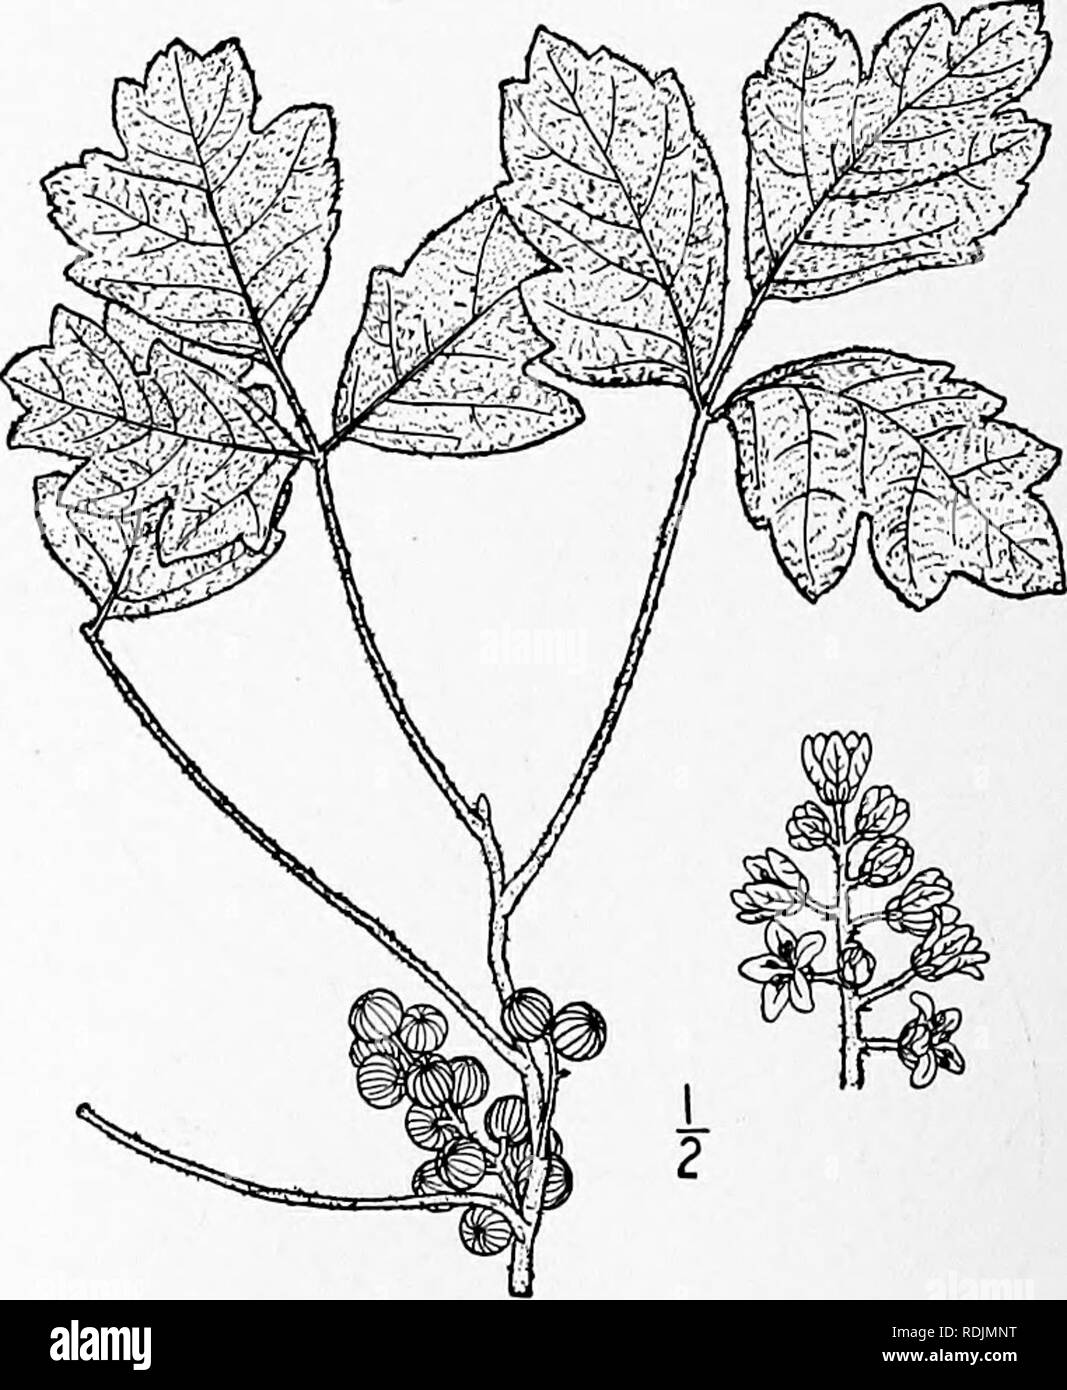 . An illustrated flora of the northern United States, Canada and the British possessions, from Newfoundland to the parallel of the southern boundary of Virginia, and from the Atlantic Ocean westward to the 102d meridian. Botany; Botany. 2. Toxicodendron radicans (L.) Kuntze. Poison, Climbing or Three-leaved Ivy. Poison Oak. Climath. Fig. 2782. Rhus radicans L. Sp. PI. 266. 1753. Rhus Toxicodendron of American authors, in part, not L. Toxicodendron vulgare Mill. Gard. Diet. Ed. 8, no. I. 1768. Rhus microcarpa Steud. Nomencl. 689. 1821. T, radicans Kuntze, Rev. Gen. 153. 1891. A woody vine, clim Stock Photo